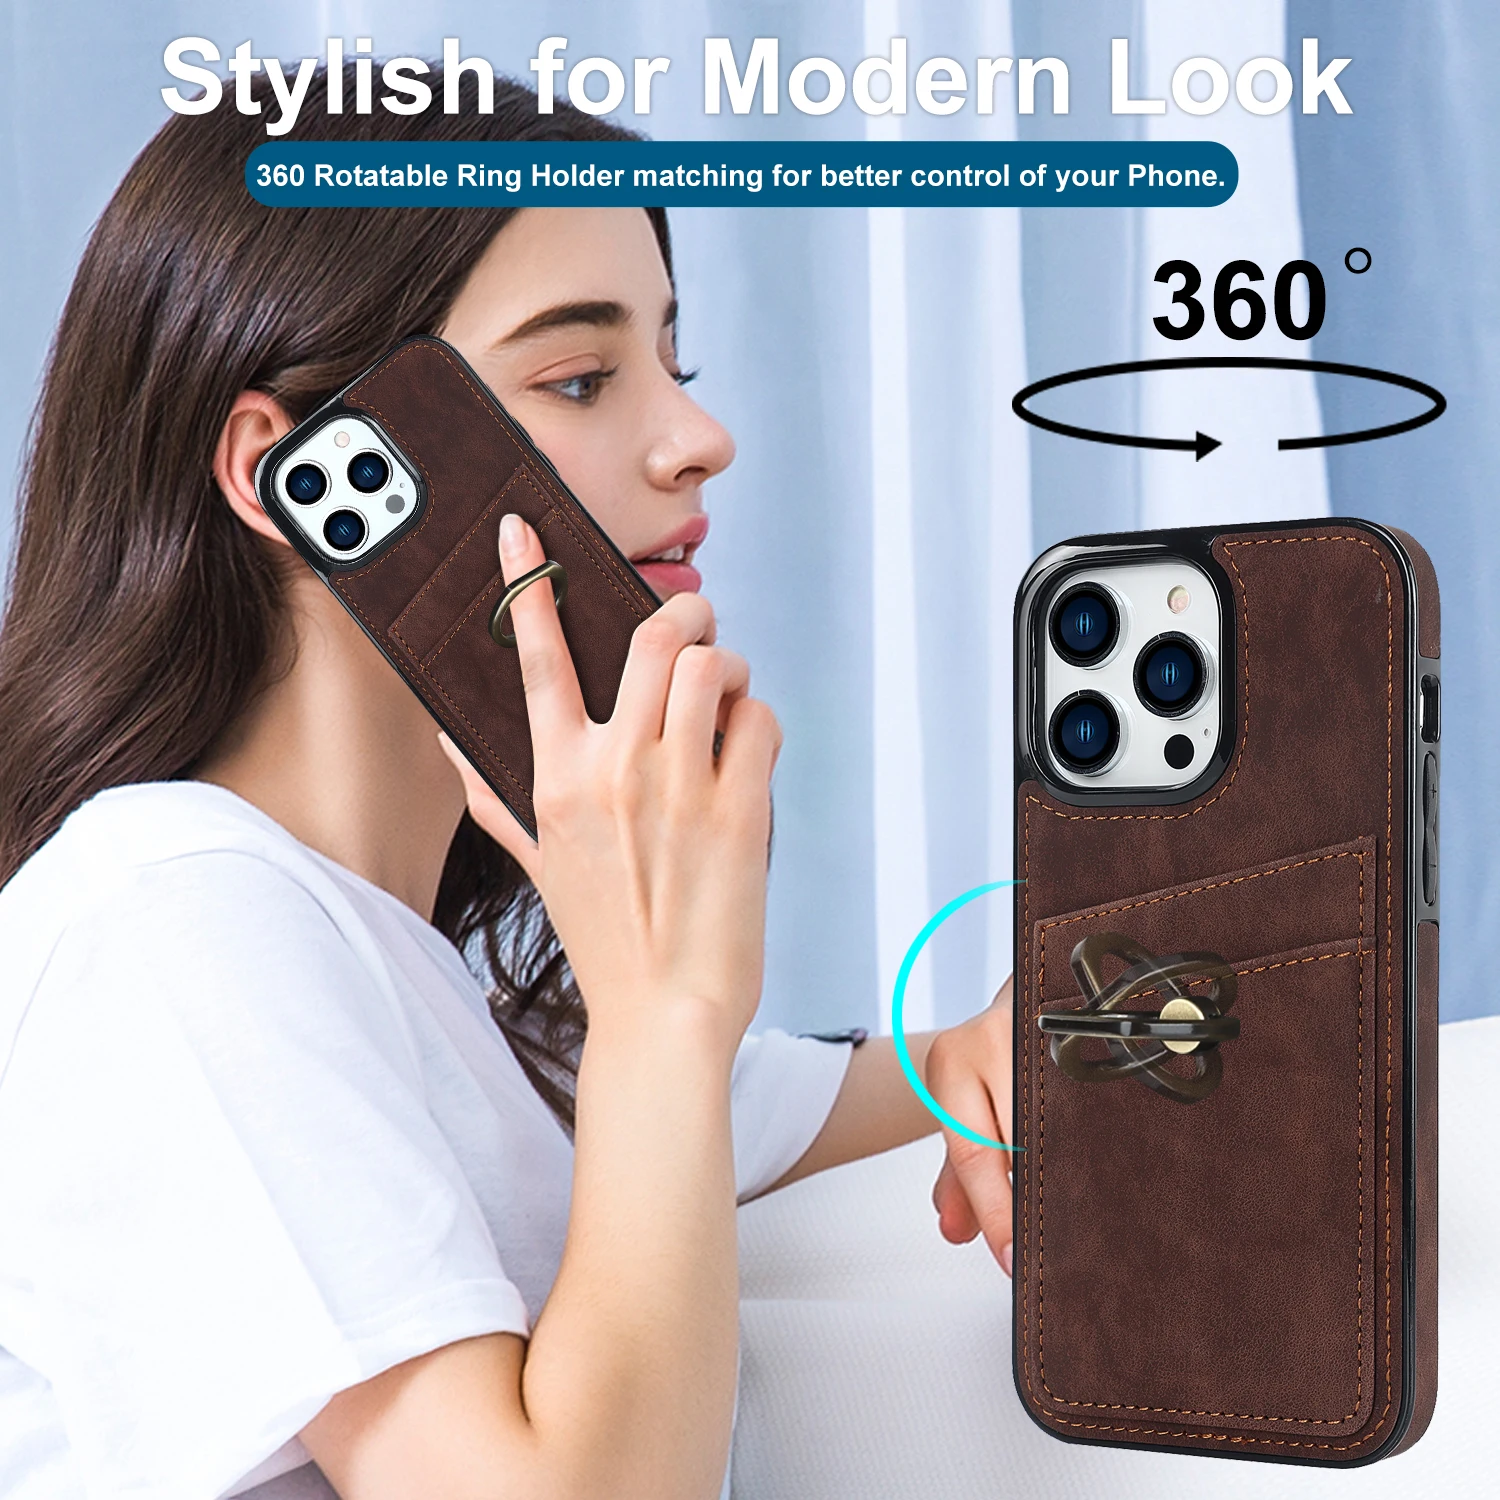 Soft Suede Leather Ring Holder iPhone Case